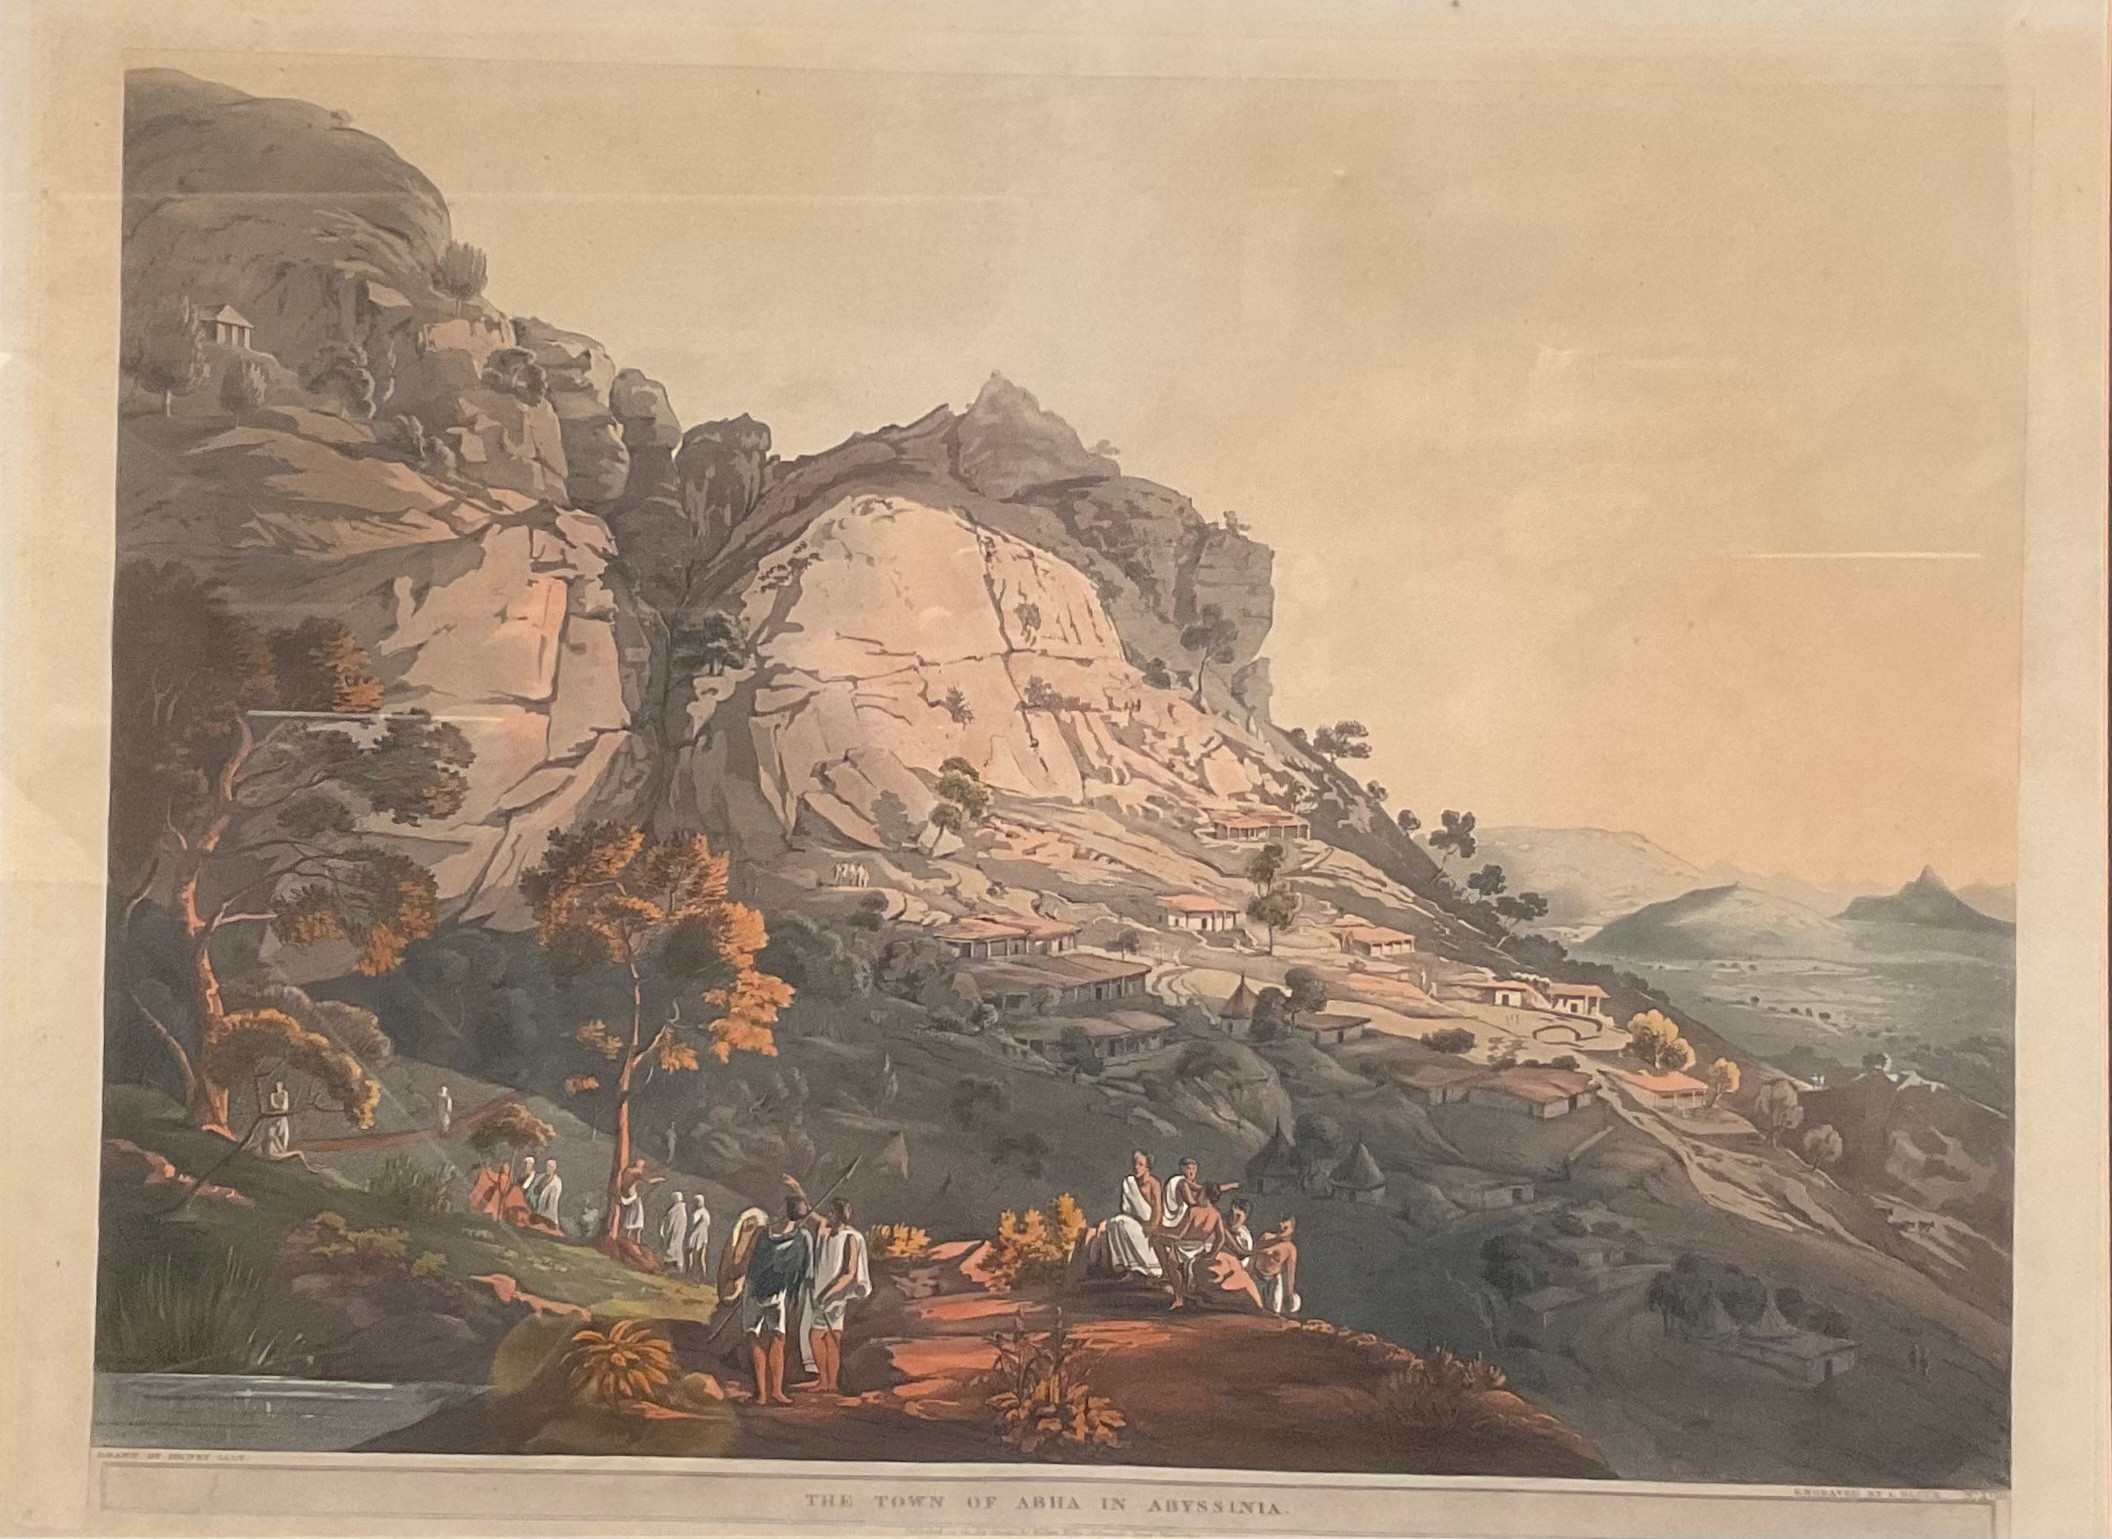 L Bluck, by, Henry Salt, after, The Town of Abha in Abyssinia, coloured engraving, plate no.XVIII,